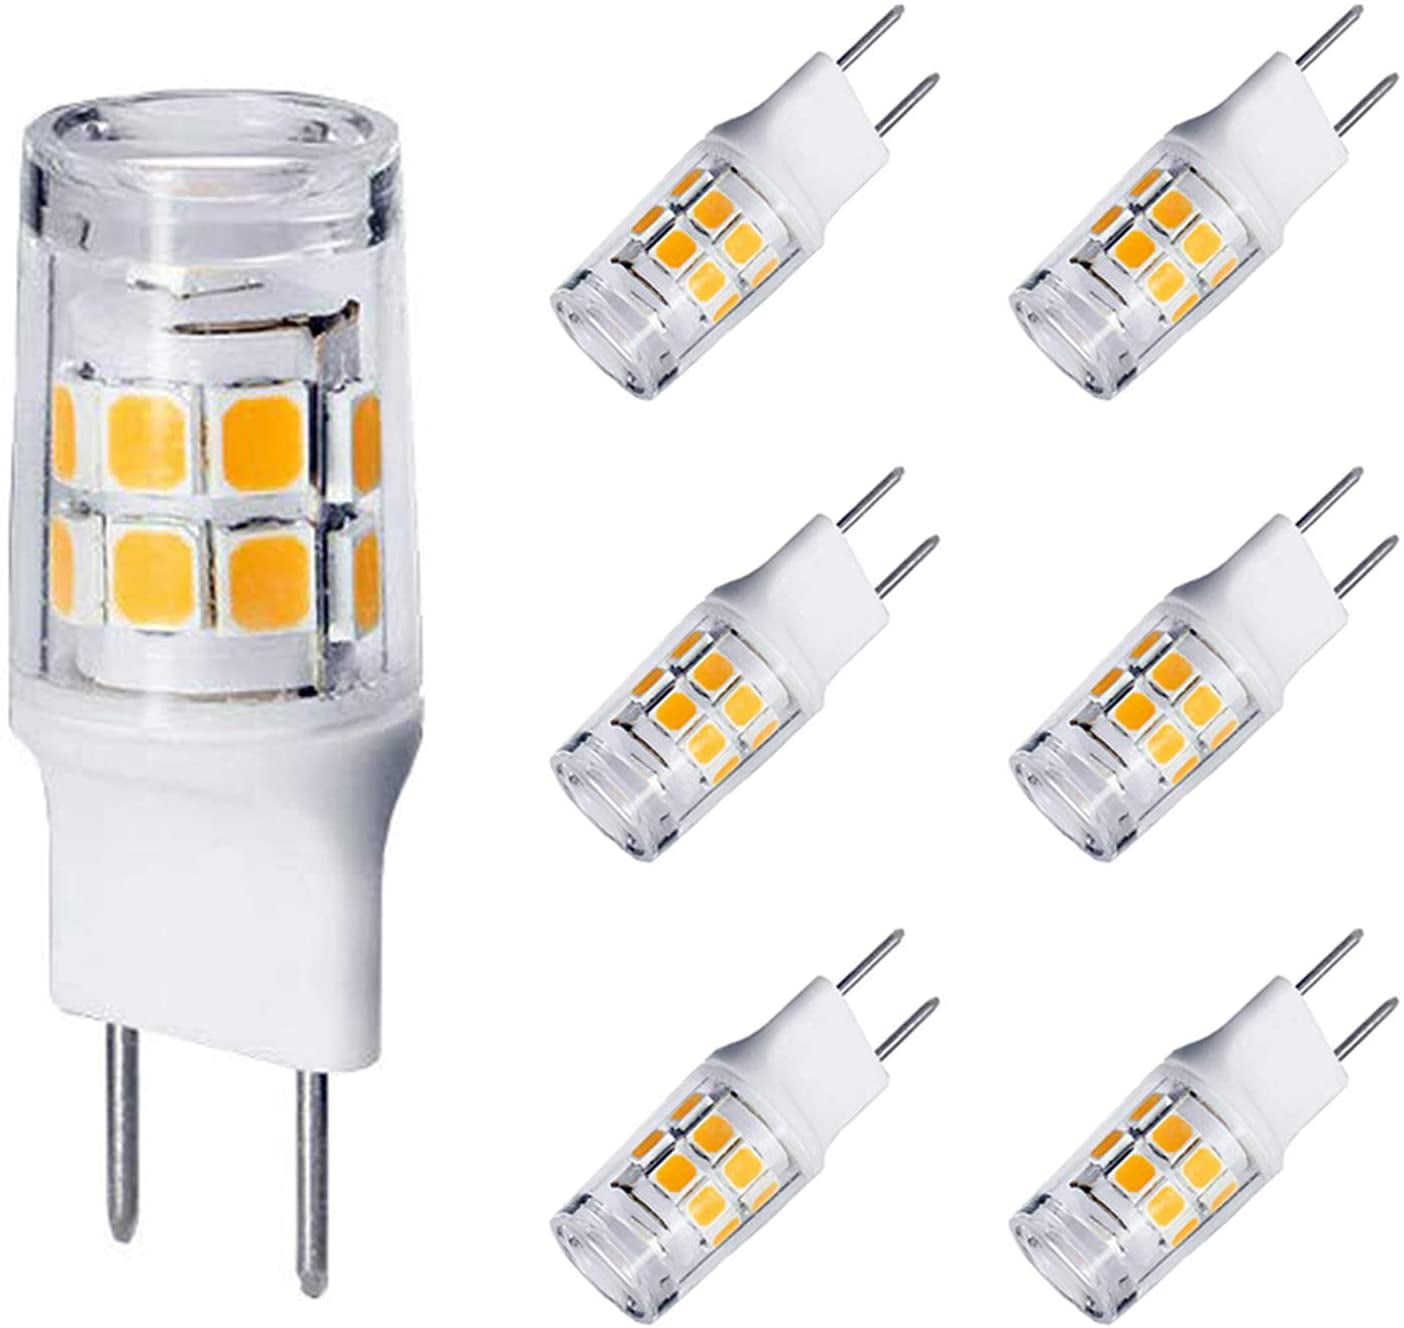 G8 LED Bulb Dimmable Under Counter Light Warm White 3000K GE Microwave Oven 6 Pack 120V Mini Bi-Pin LED Puck Light Bulbs for Under Cabinet 20-25W T4 JCD Type G8 Base Halogens Replacement